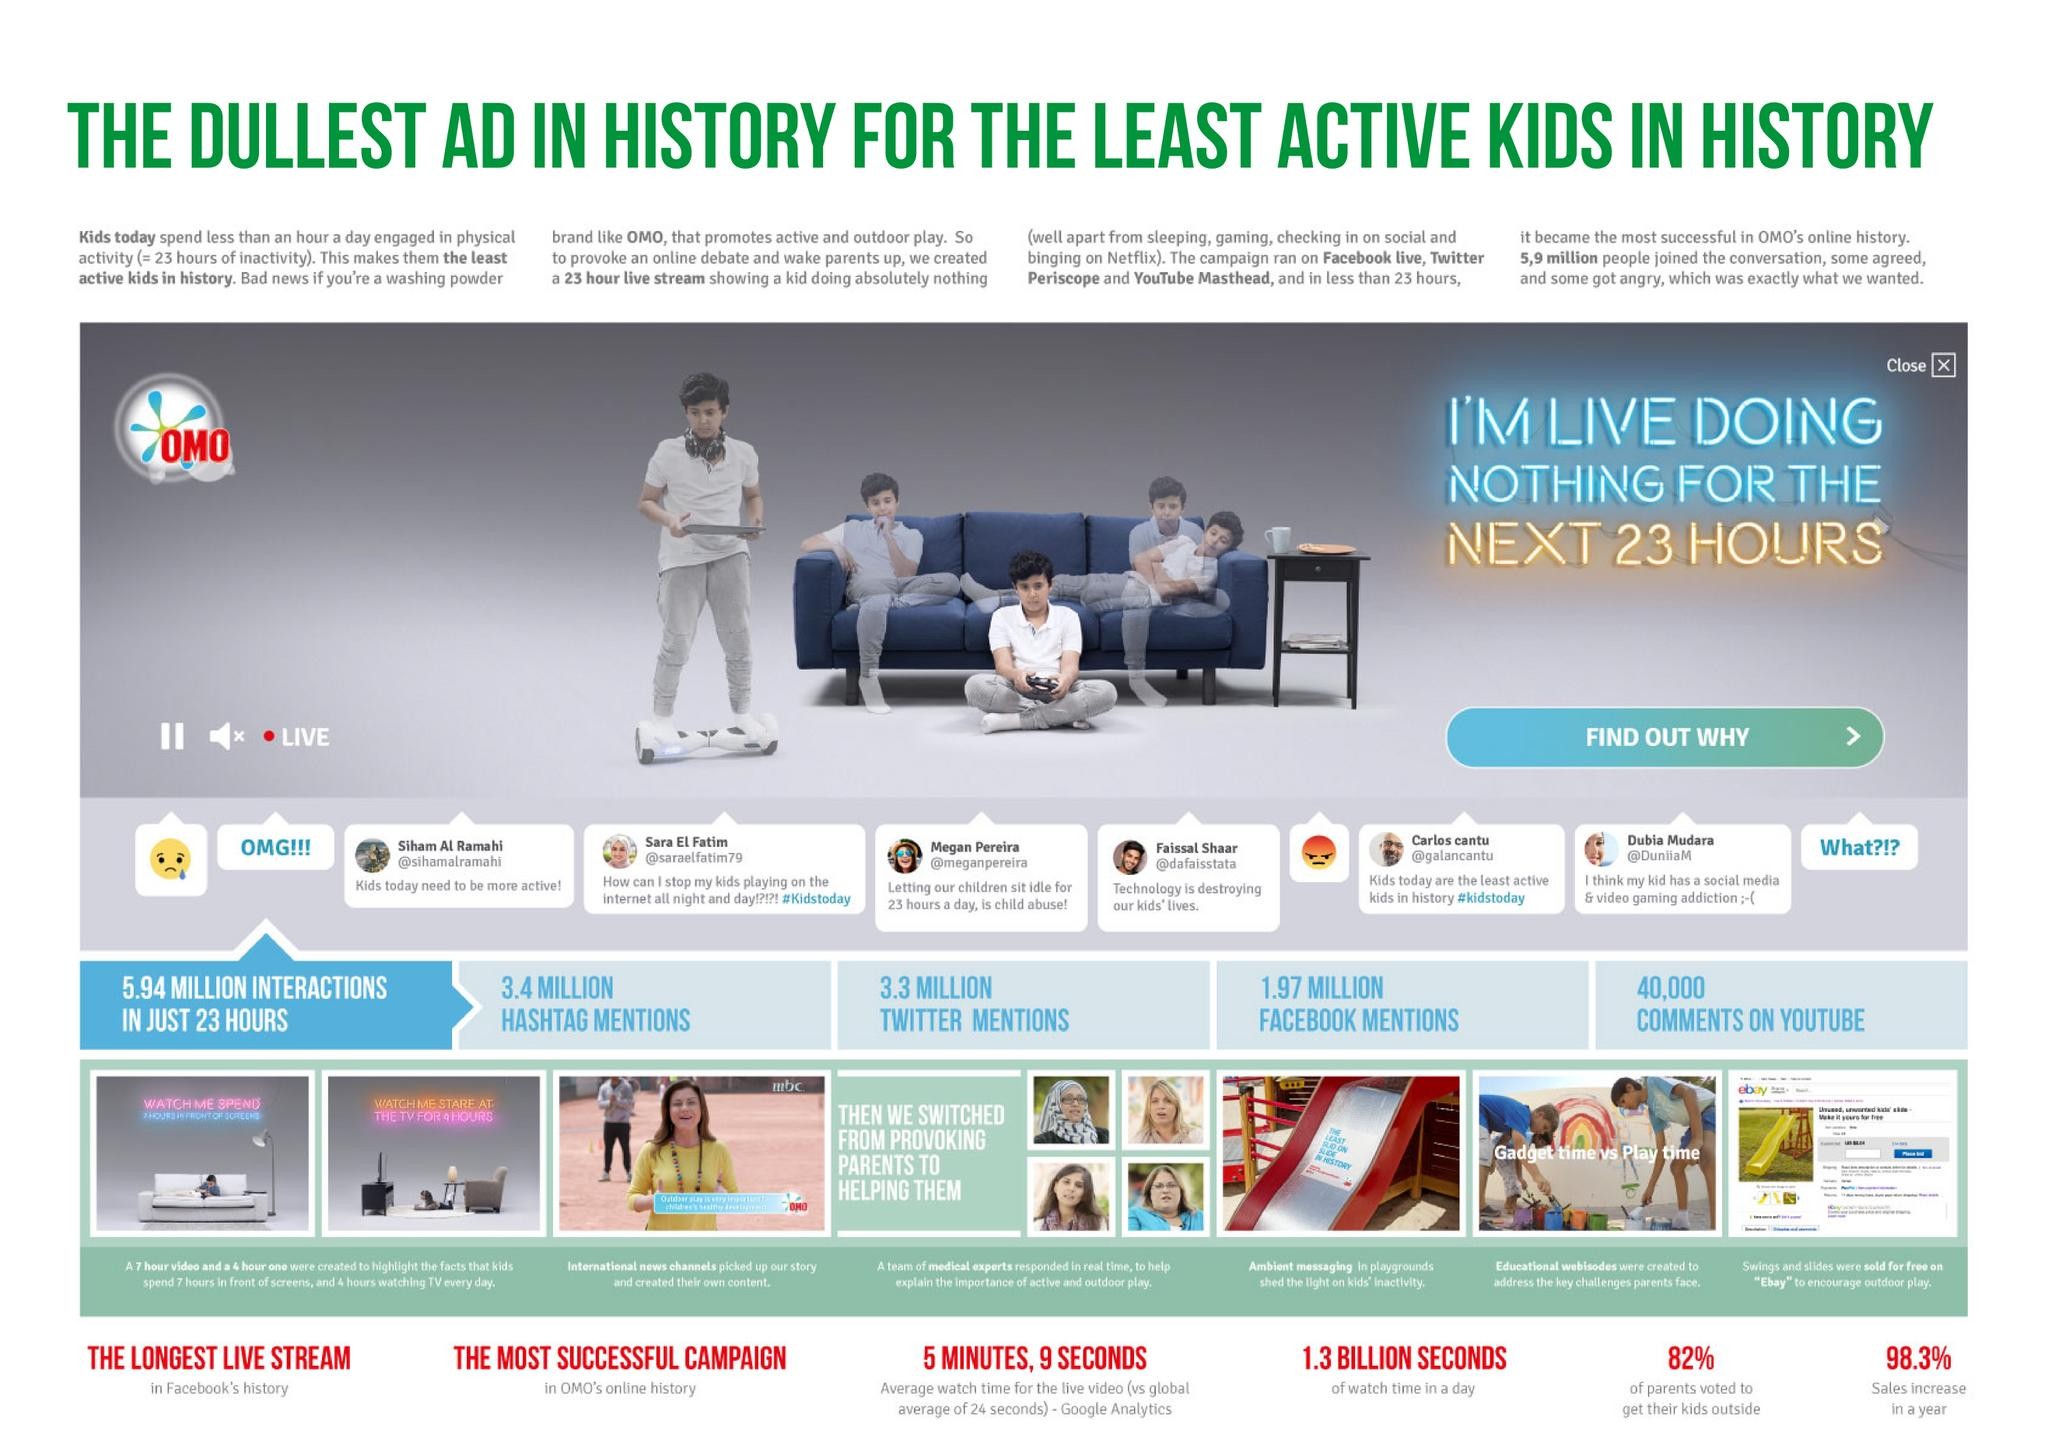 The Dullest Ad in History for the Least Active Kids in History